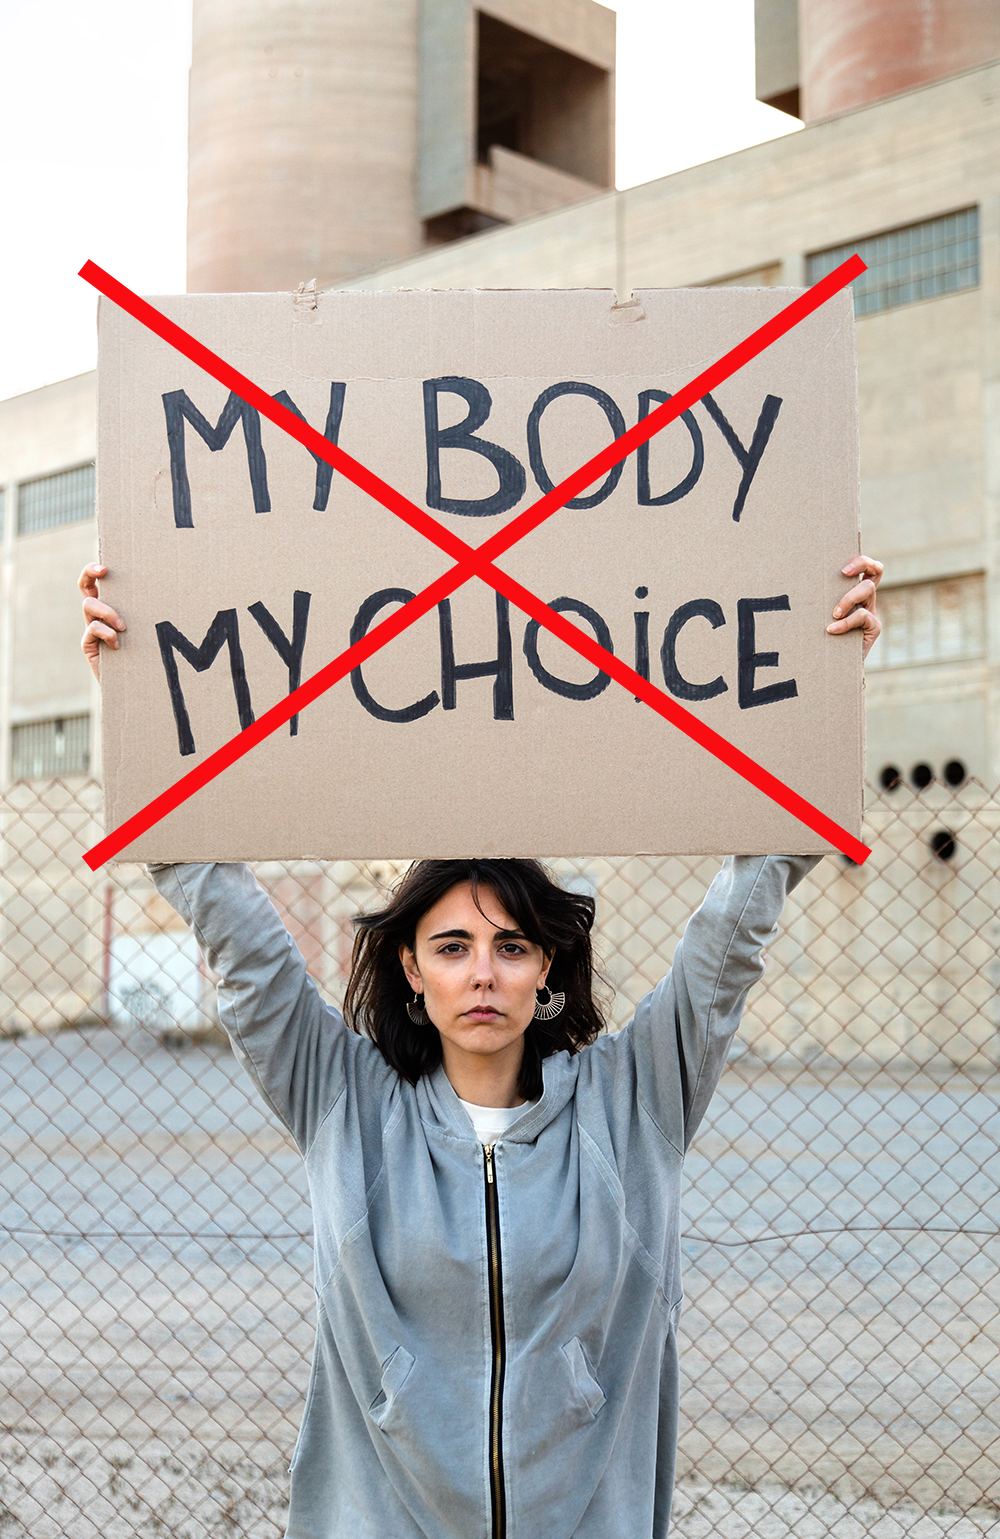 woman holding "my body, my choice" sign wiht an "x" over it.